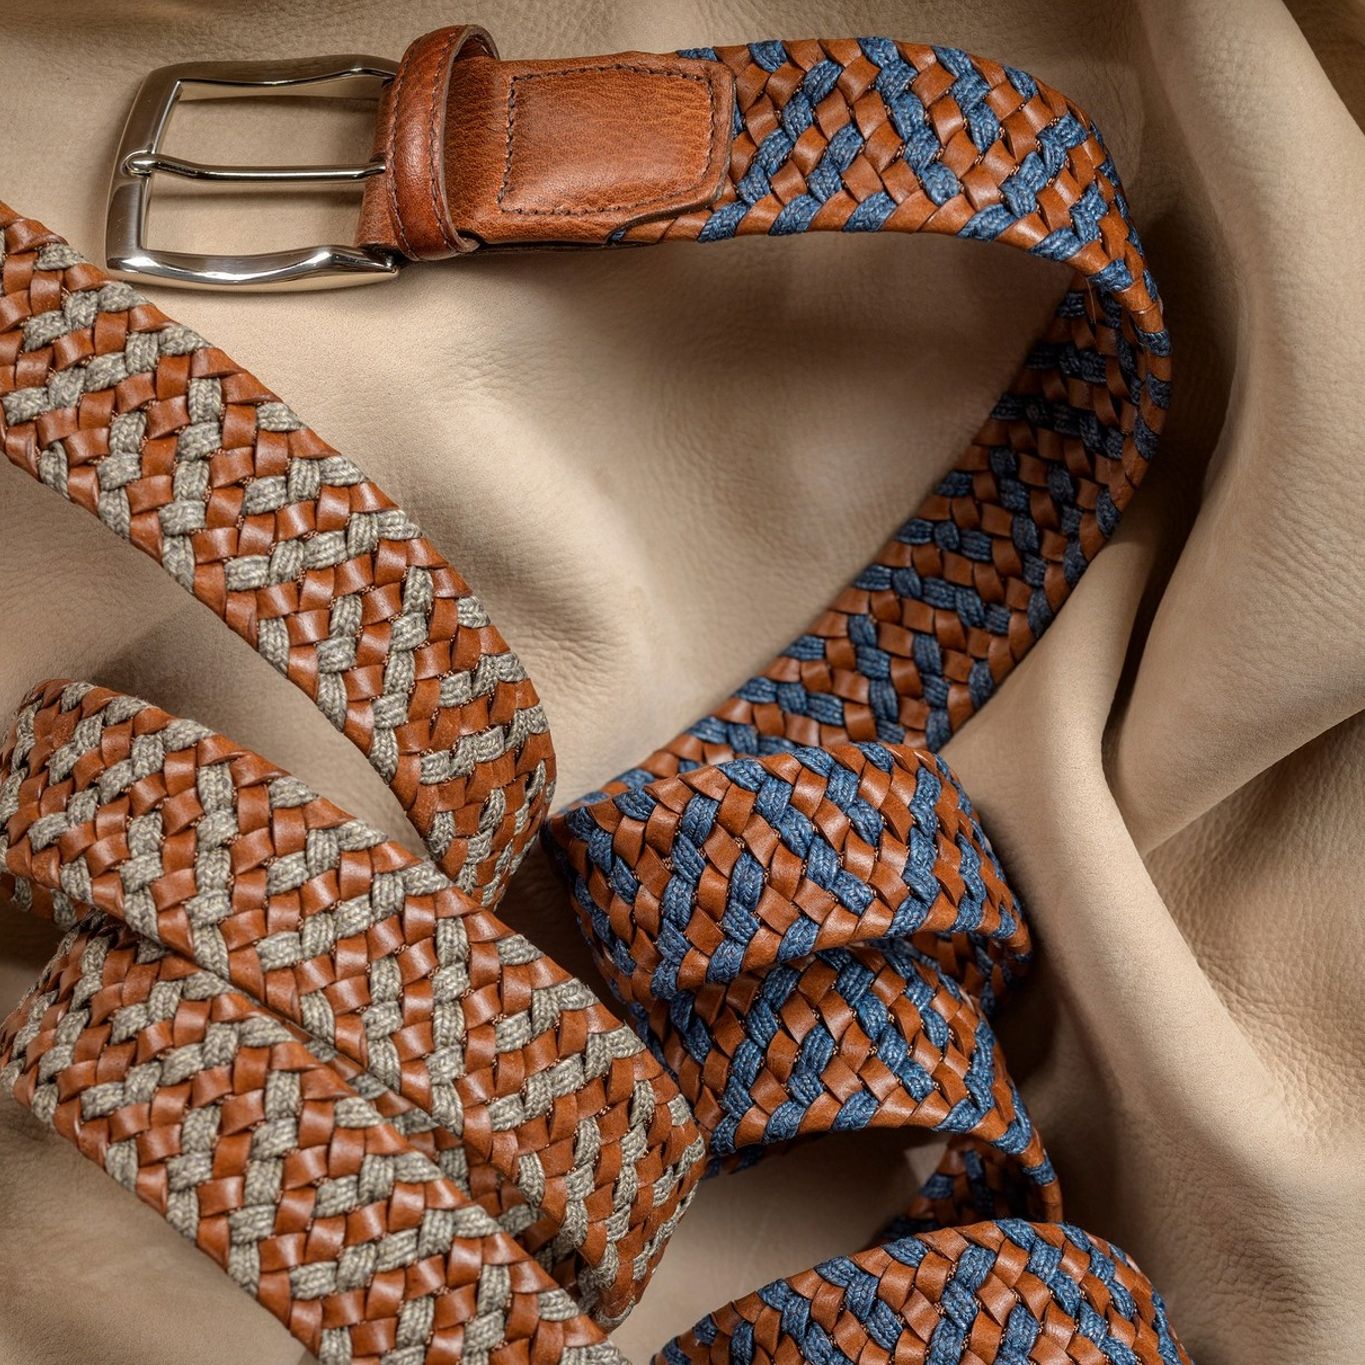 Braided Italian Leather and Linen Belt in Cognac and Navy by Torino Leather